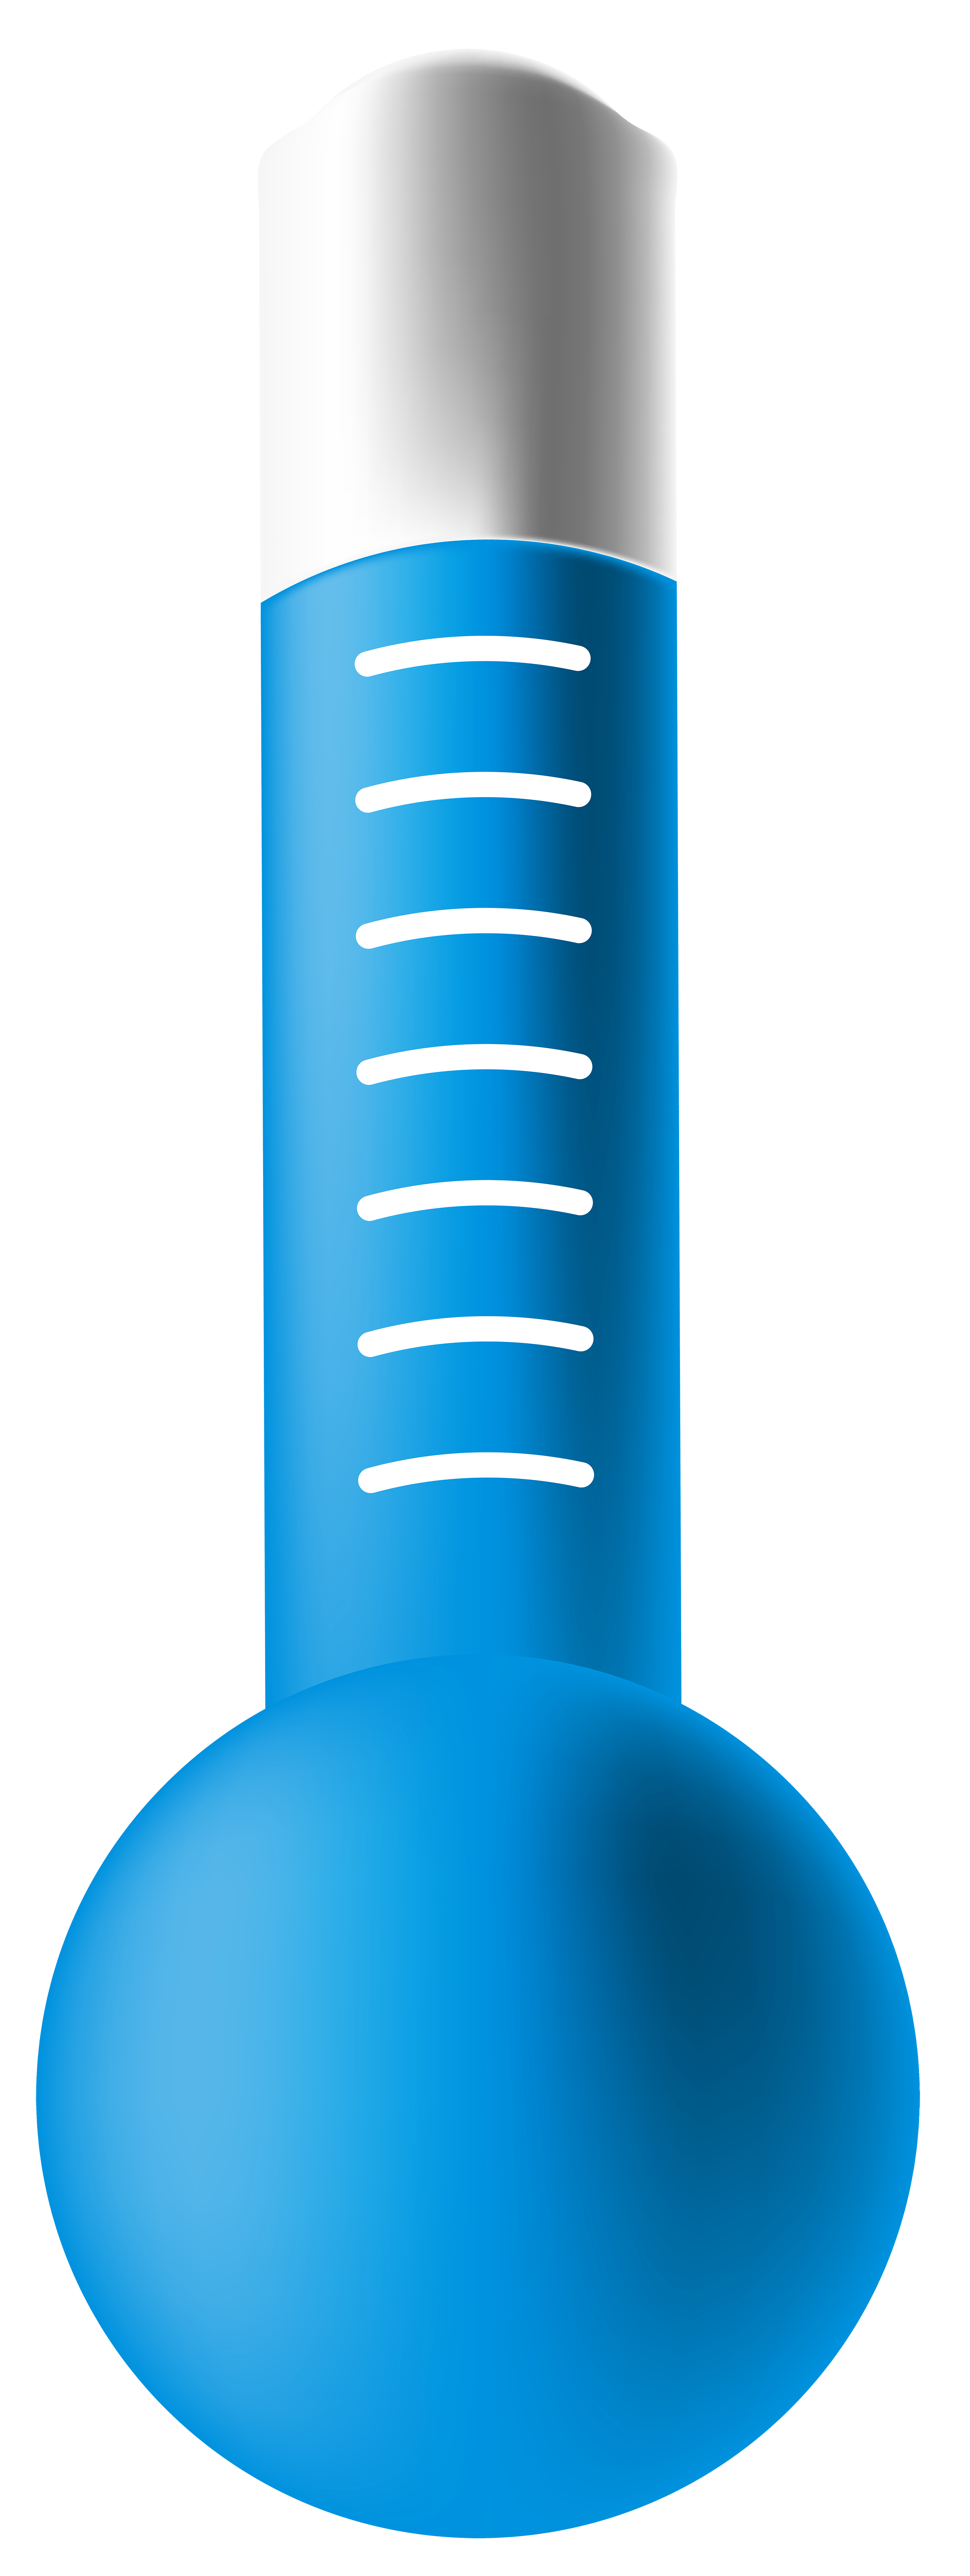 https://pics.clipartpng.com/Cold_Thermometer_Weather_Icon_PNG_Clip_Art-1531.png